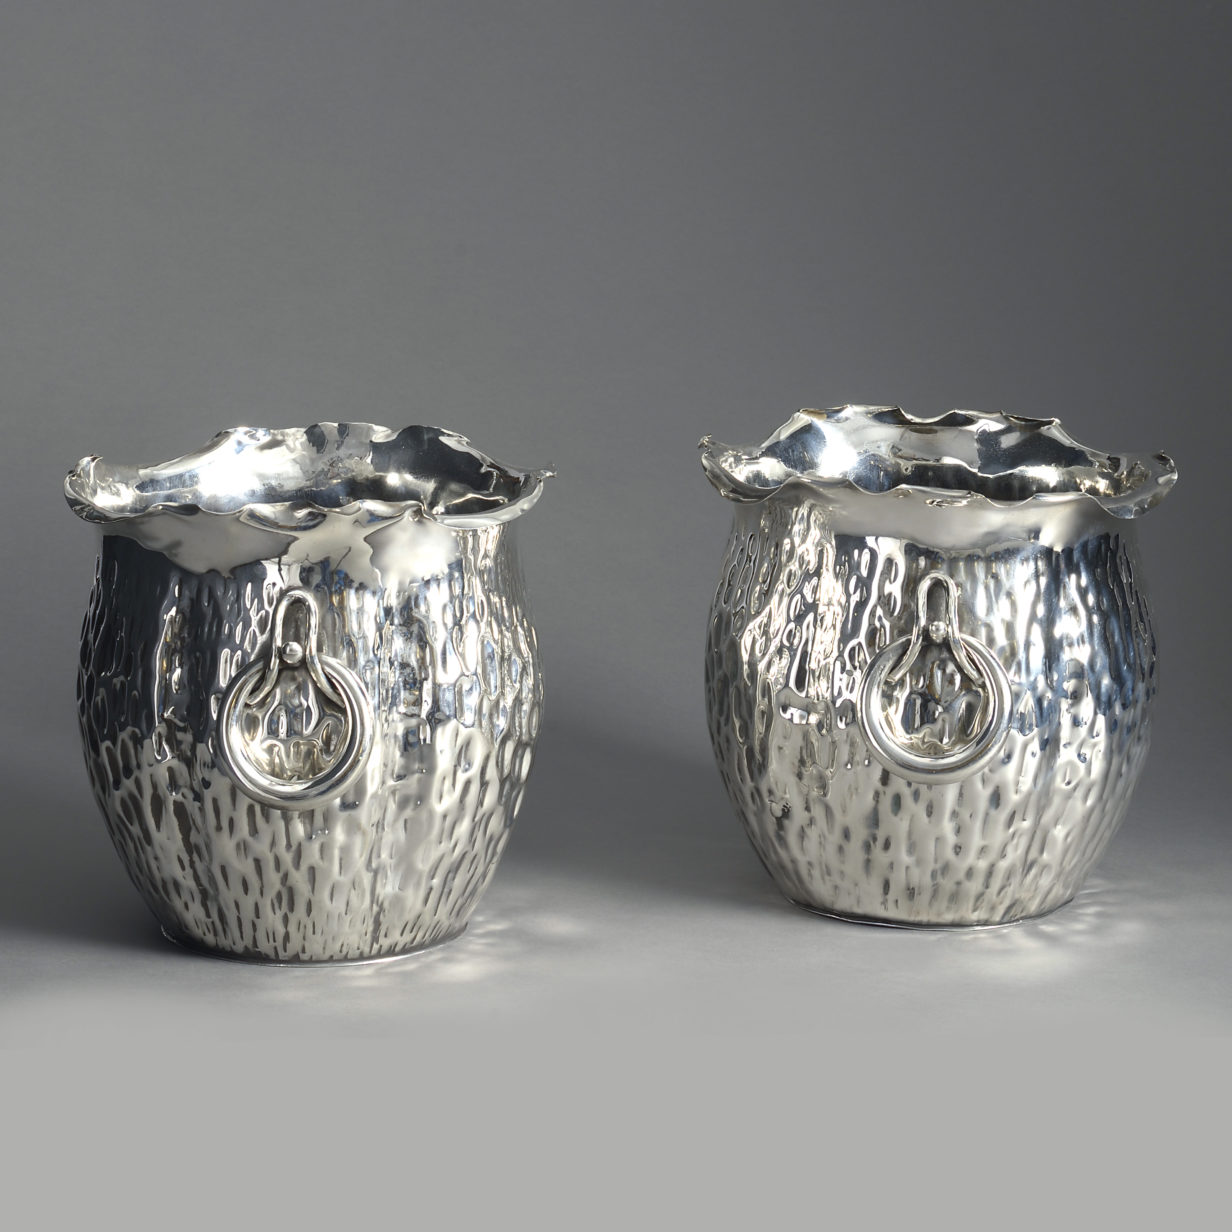 Pair of 19th century silver planters or coolers by hukin & heath